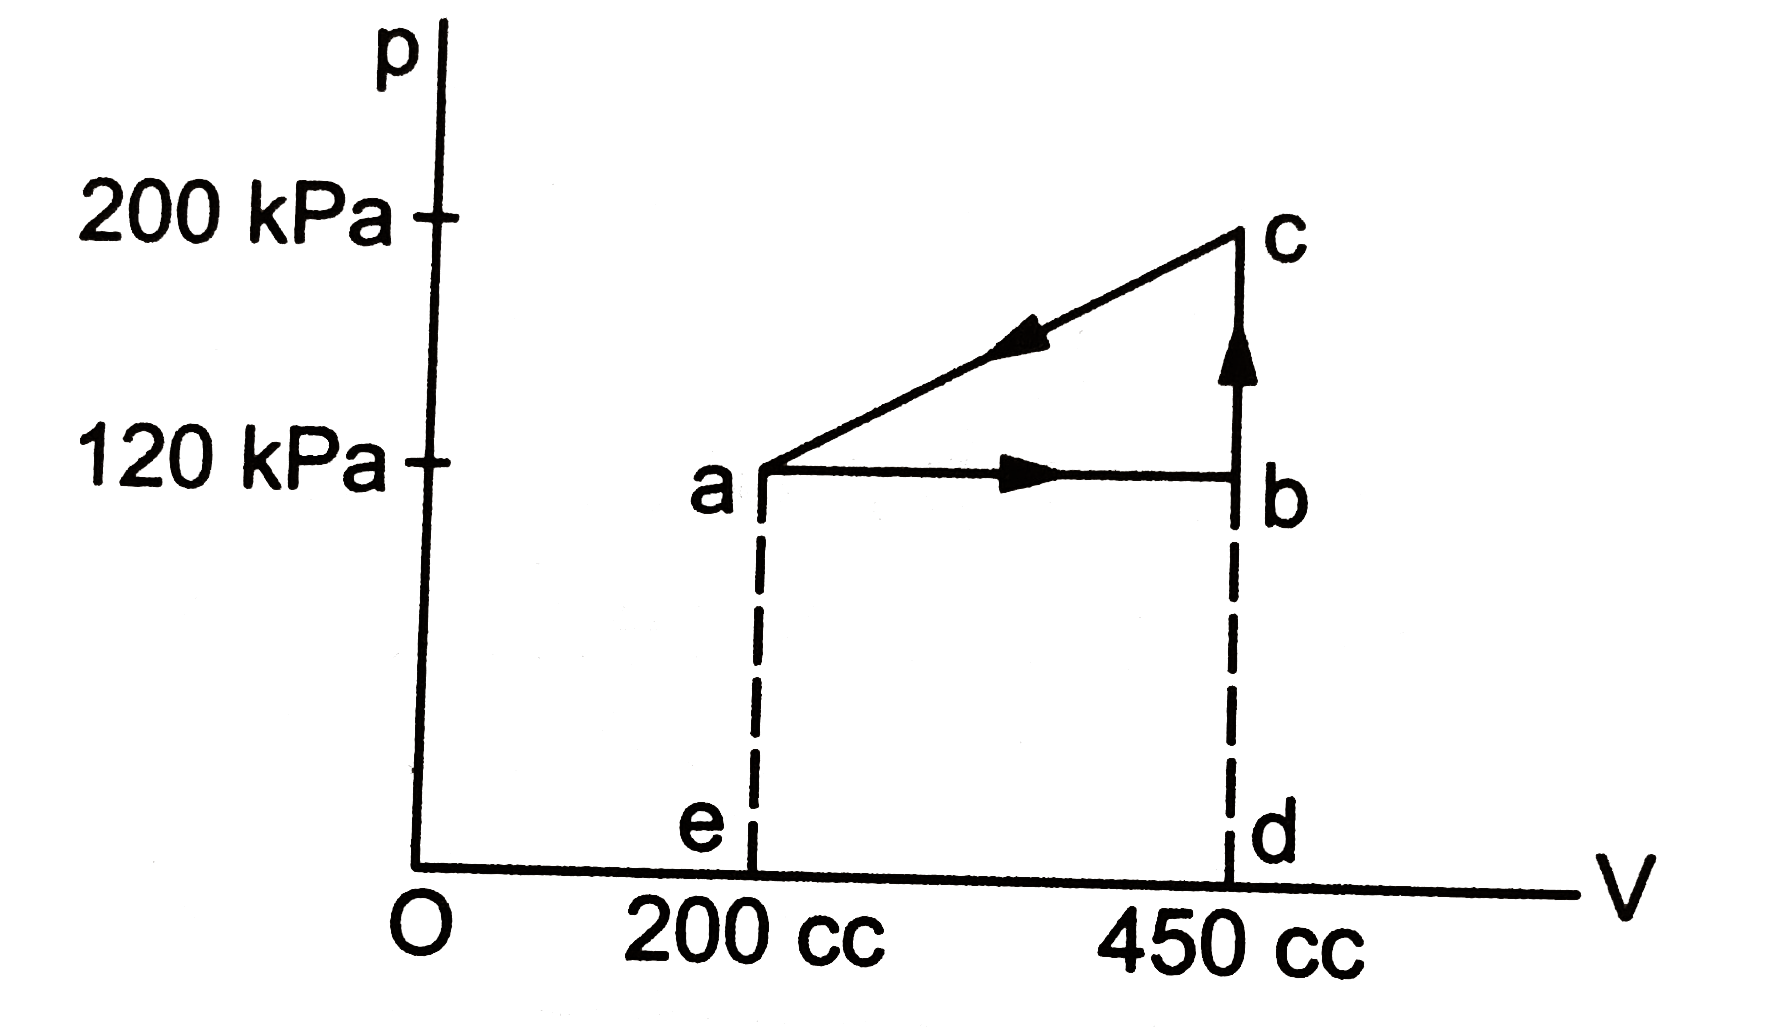 calculate the work done by a gas as it is taken from the state a to b, b to c and c to a as shown in